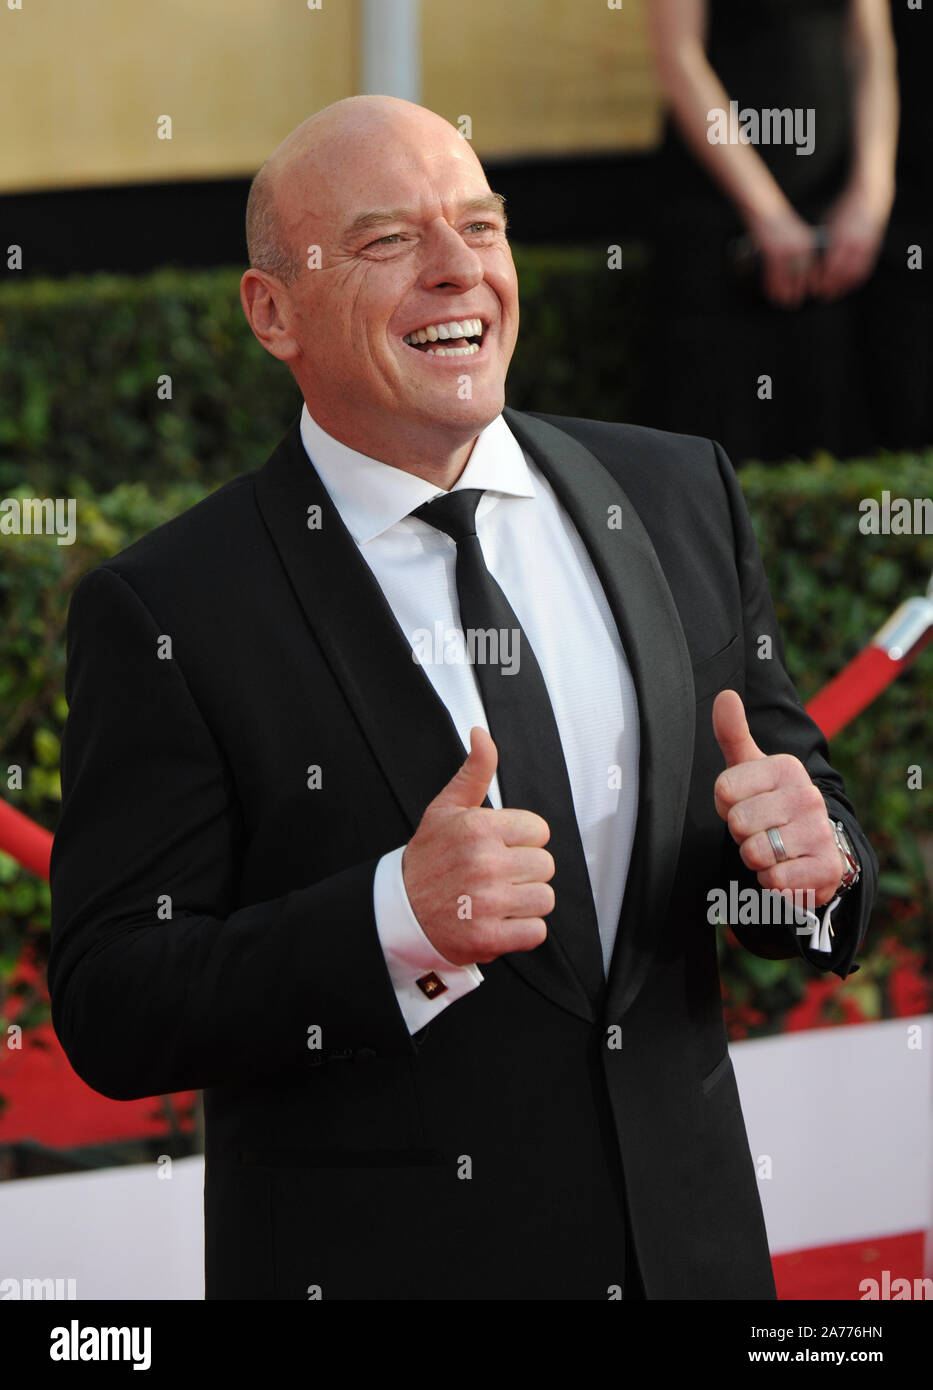 Dean Norris Biography, Celebrity Facts and Awards - TV Guide